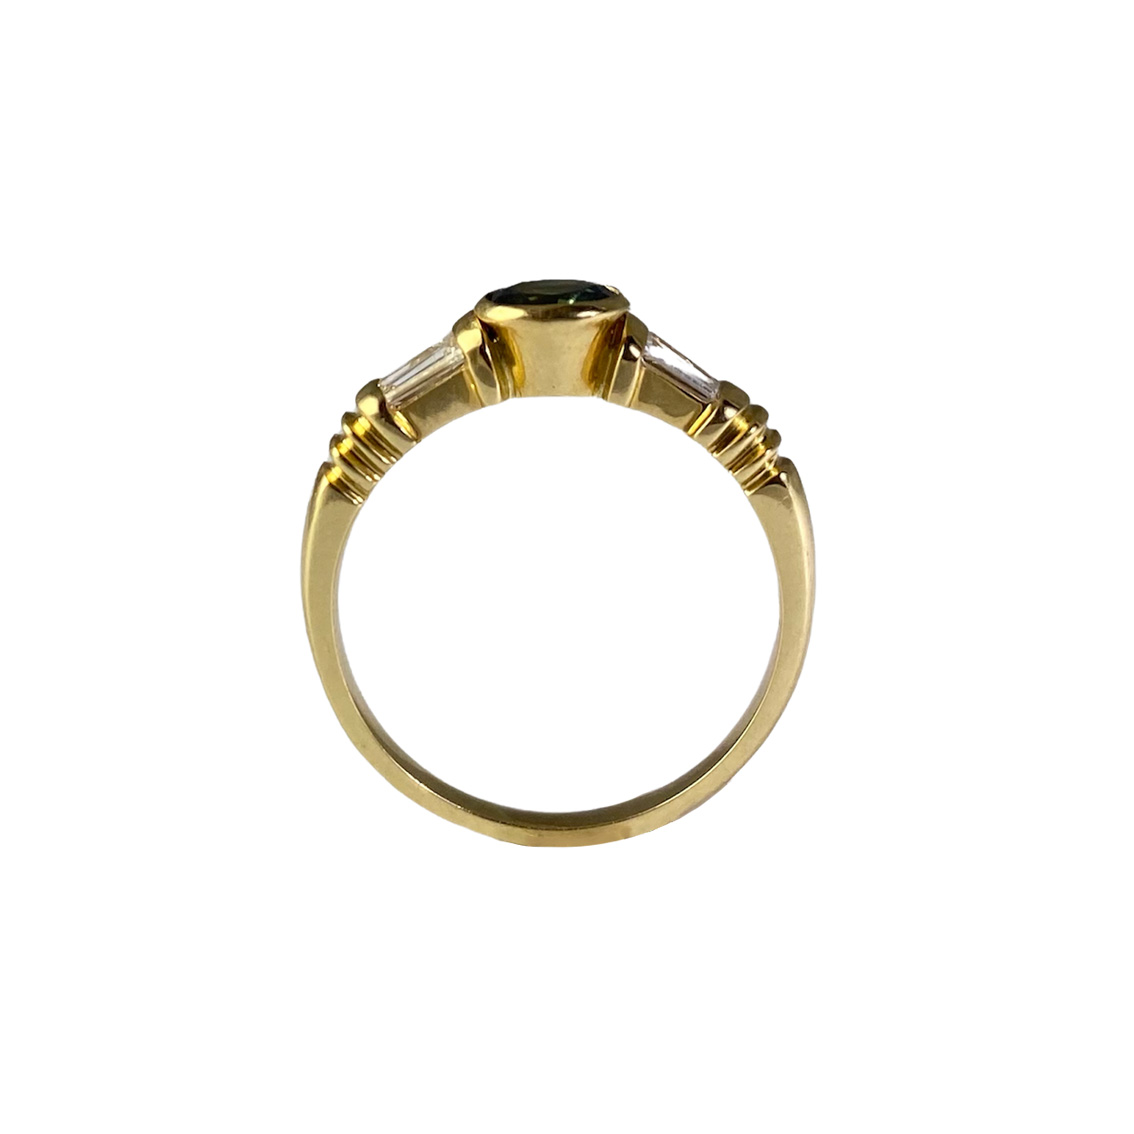 Contemporary 18ct. yellow gold, sapphire and diamond ring